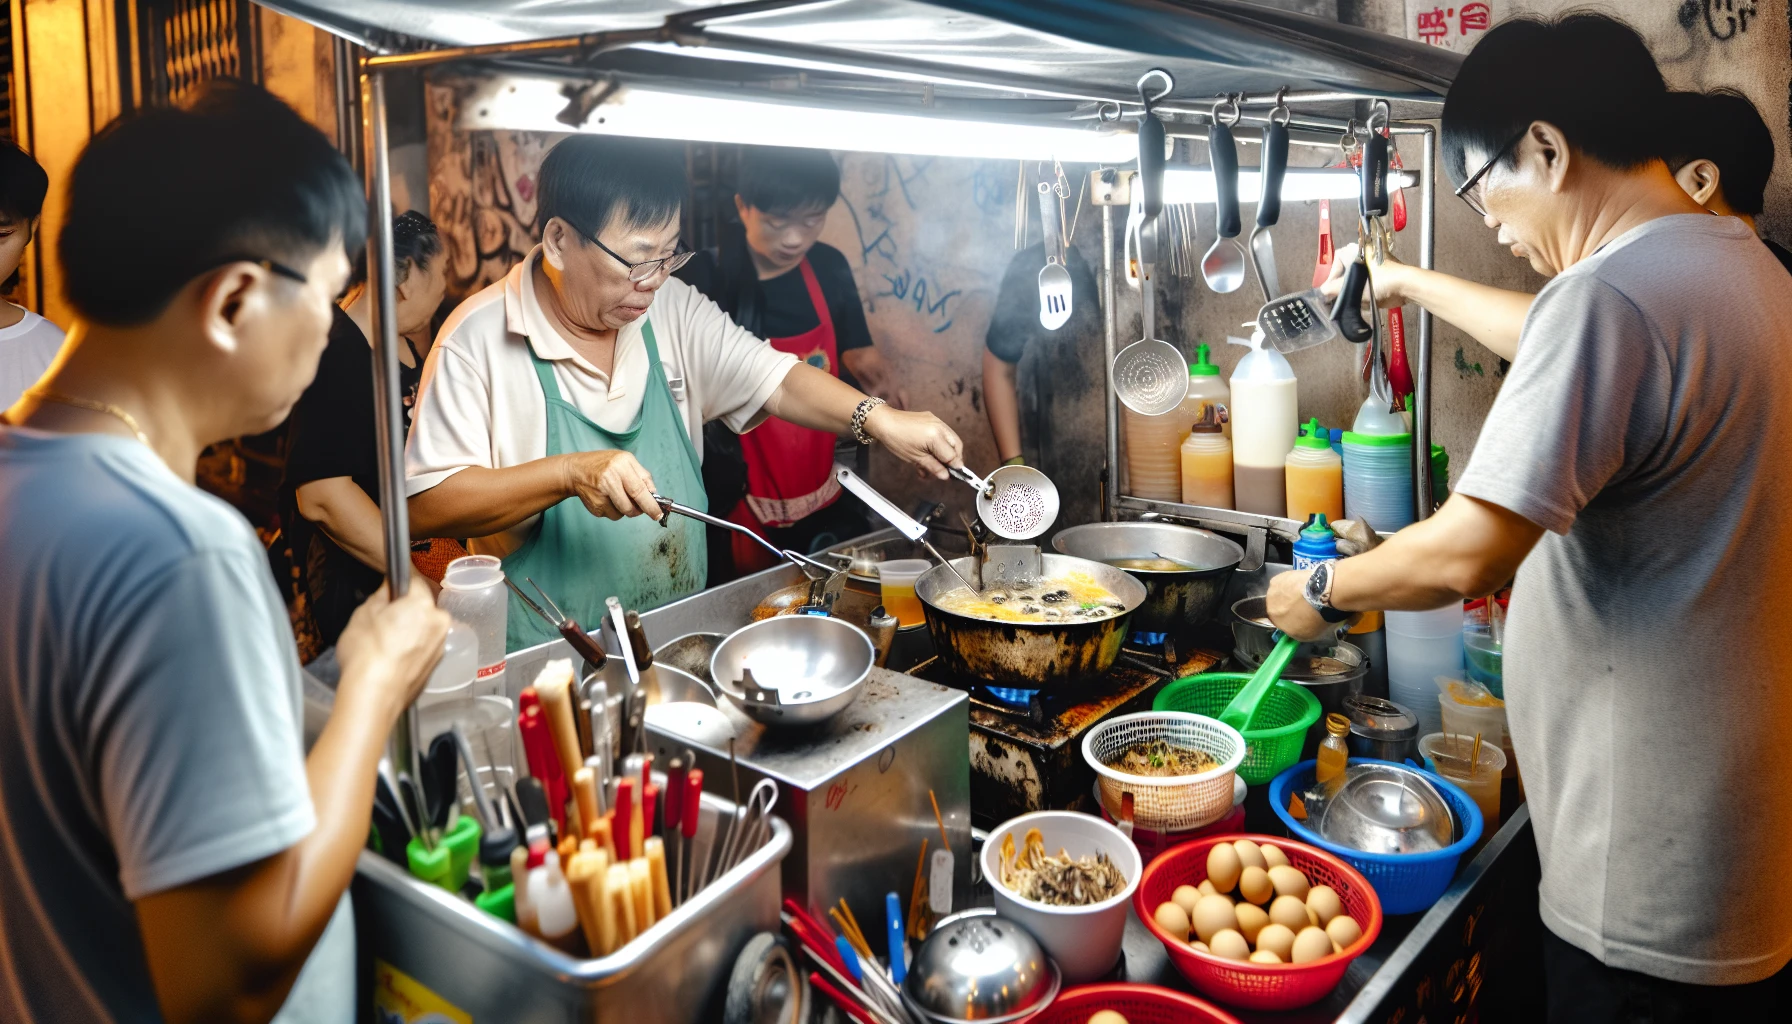 A street food vendor's cart with essential tools and equipment for food preparation